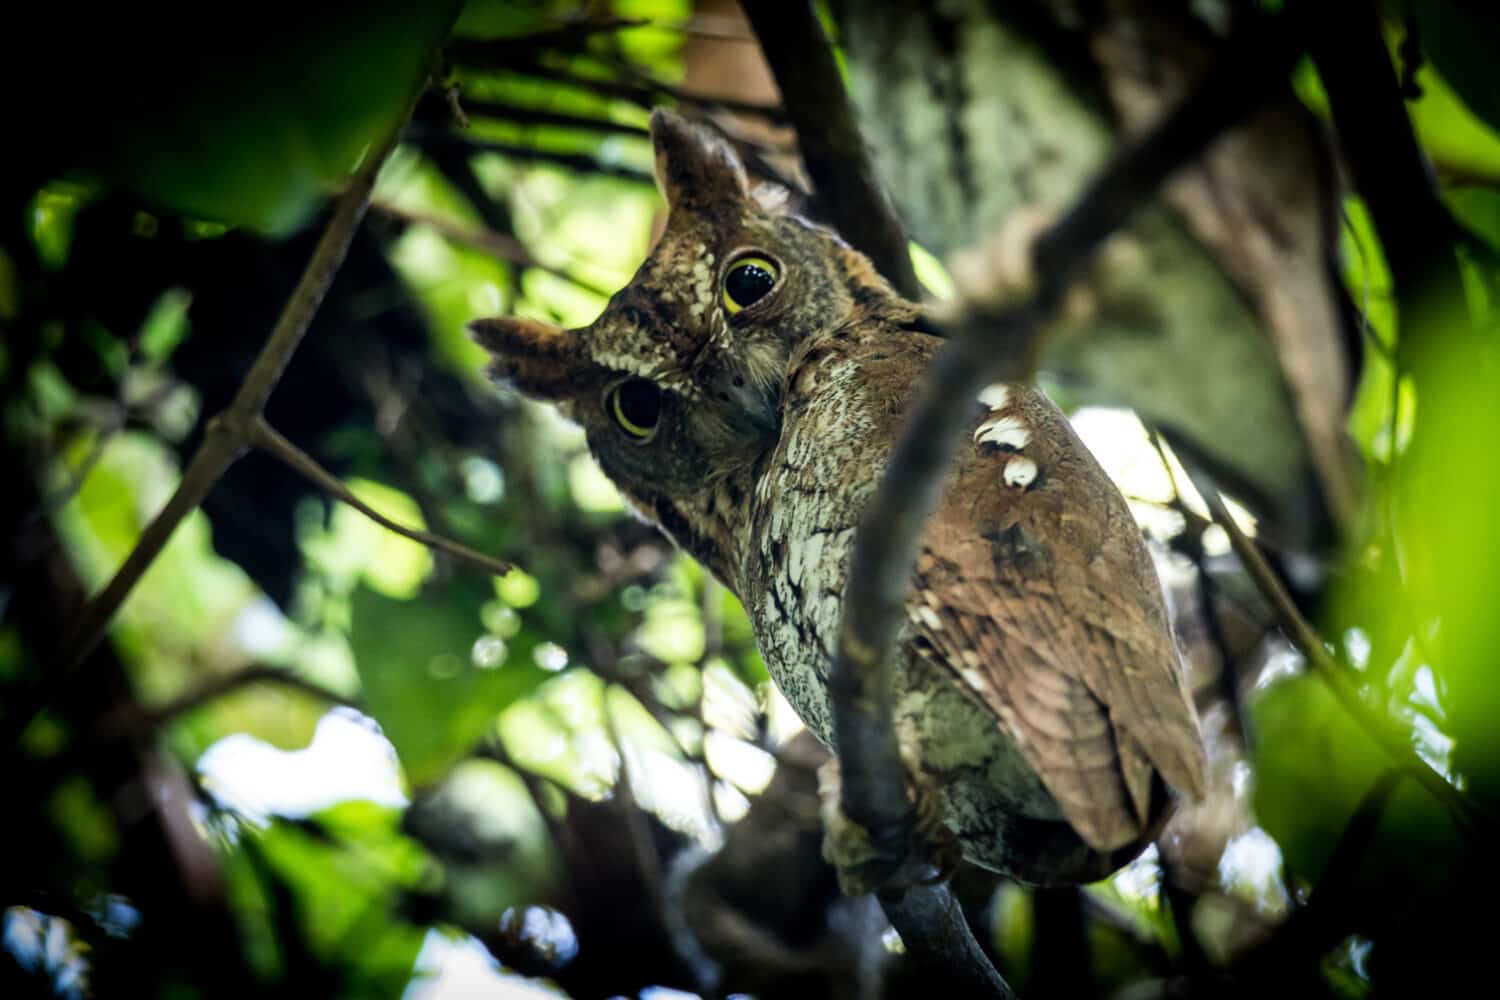 Oriental Scops Owl(Otus sunia) catch on the branch in day time in nature 